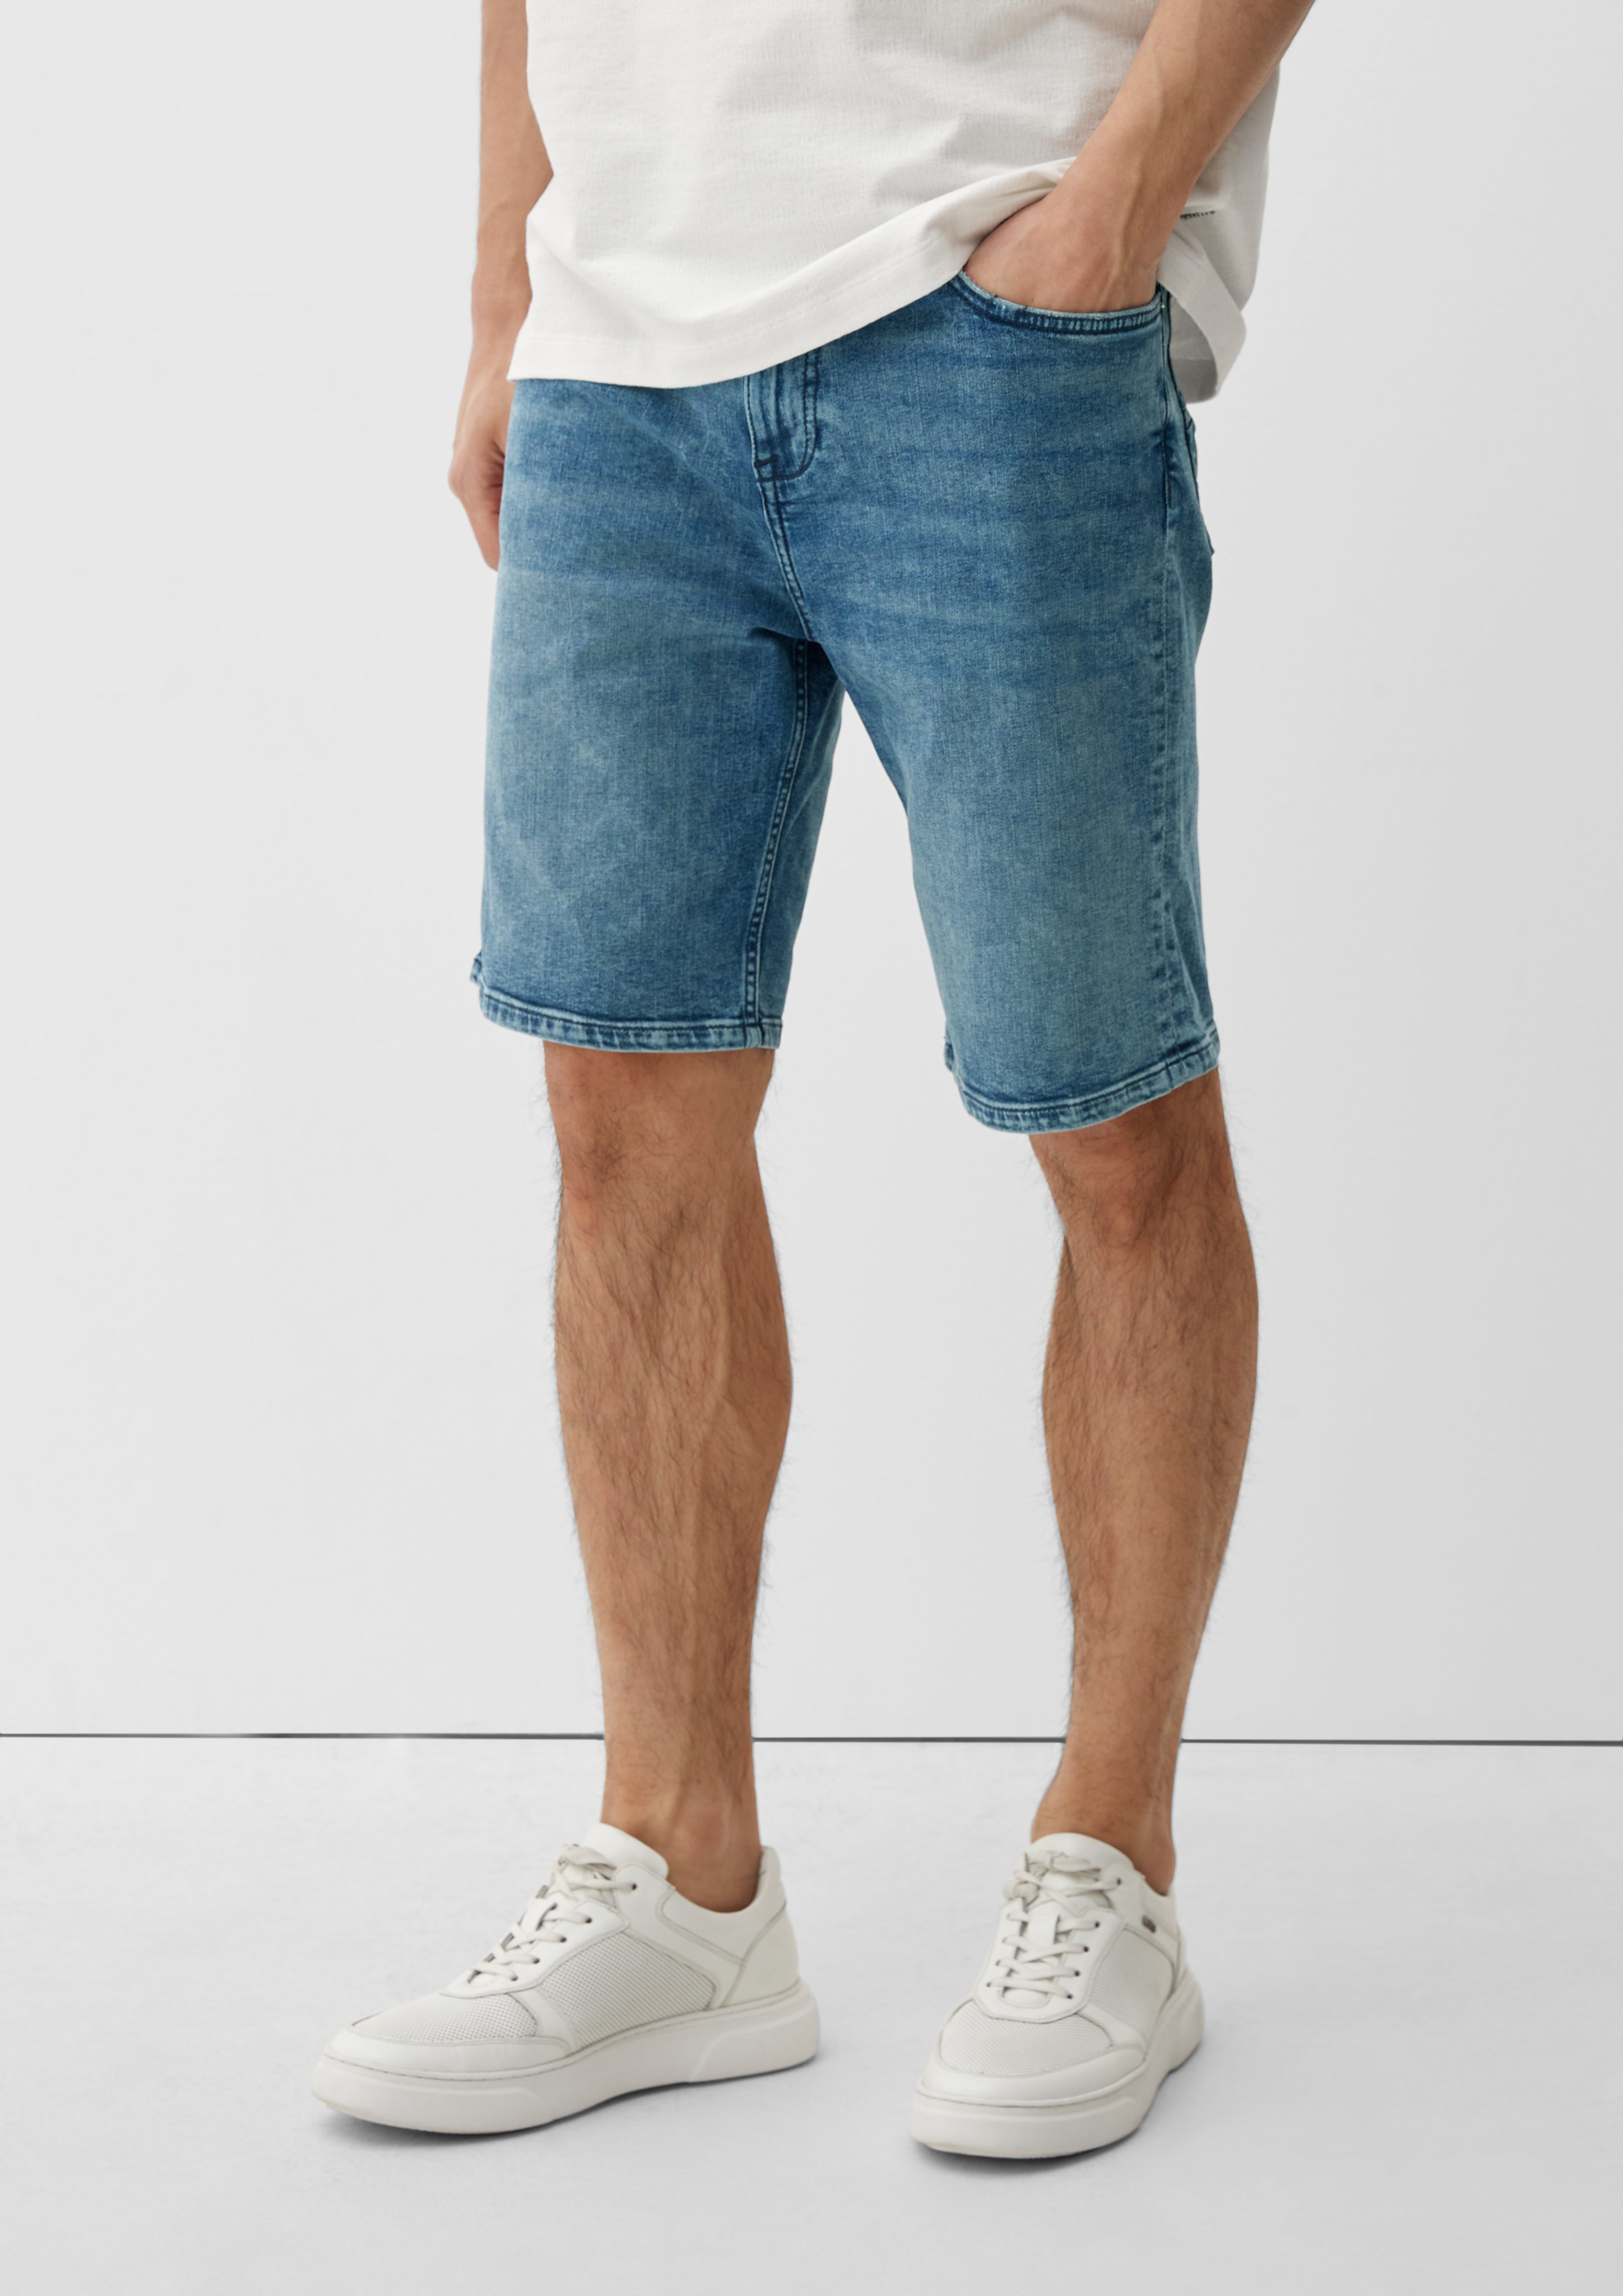 s.Oliver Jeansshorts Jeans Keith / Fit / Leg / Mid Slim Rise himmelblau Straight